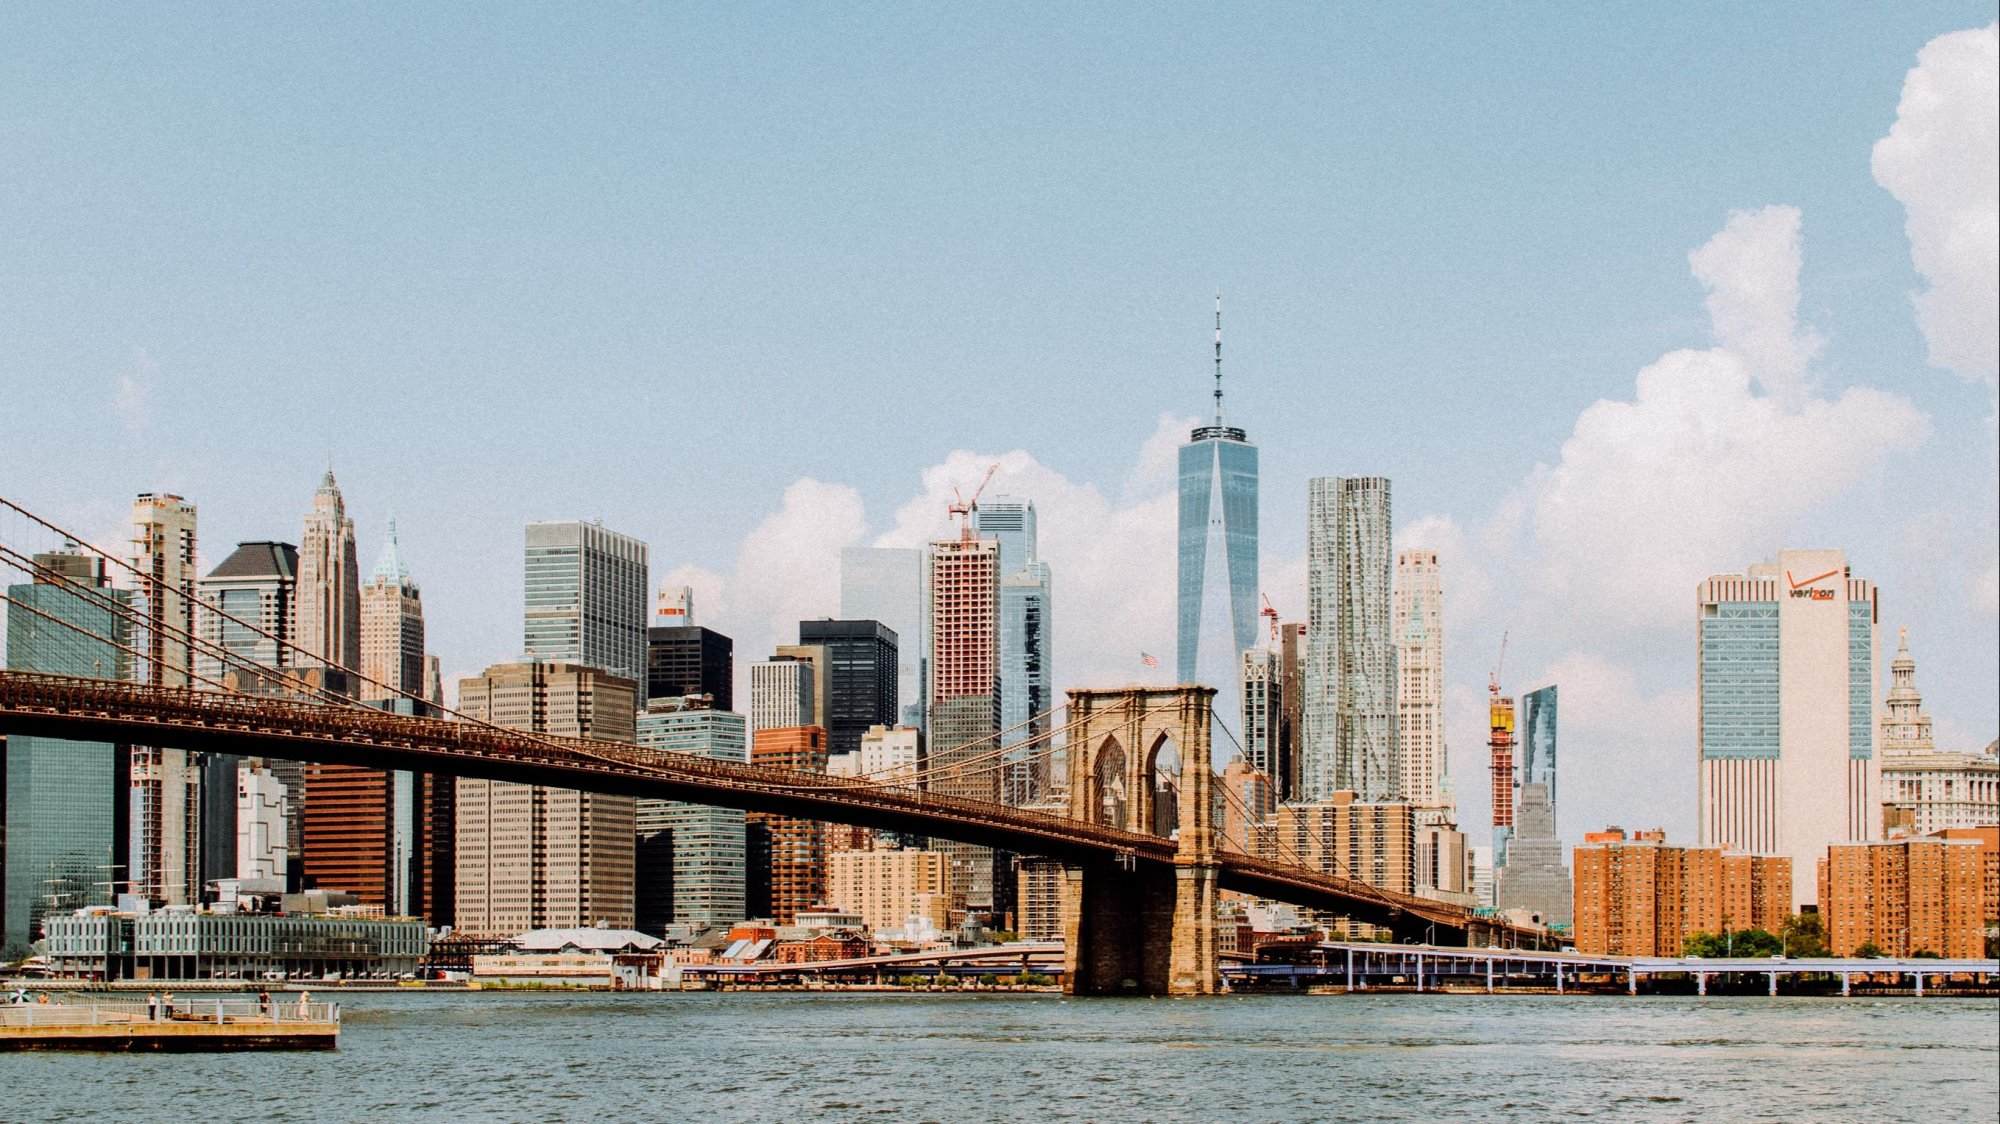 The iconic Brooklyn Bridge in New York City is a must-visit landmark for tourists and locals alike. Its stunning architecture and breathtaking views of the city skyline make it a popular spot to capture memorable photographs.